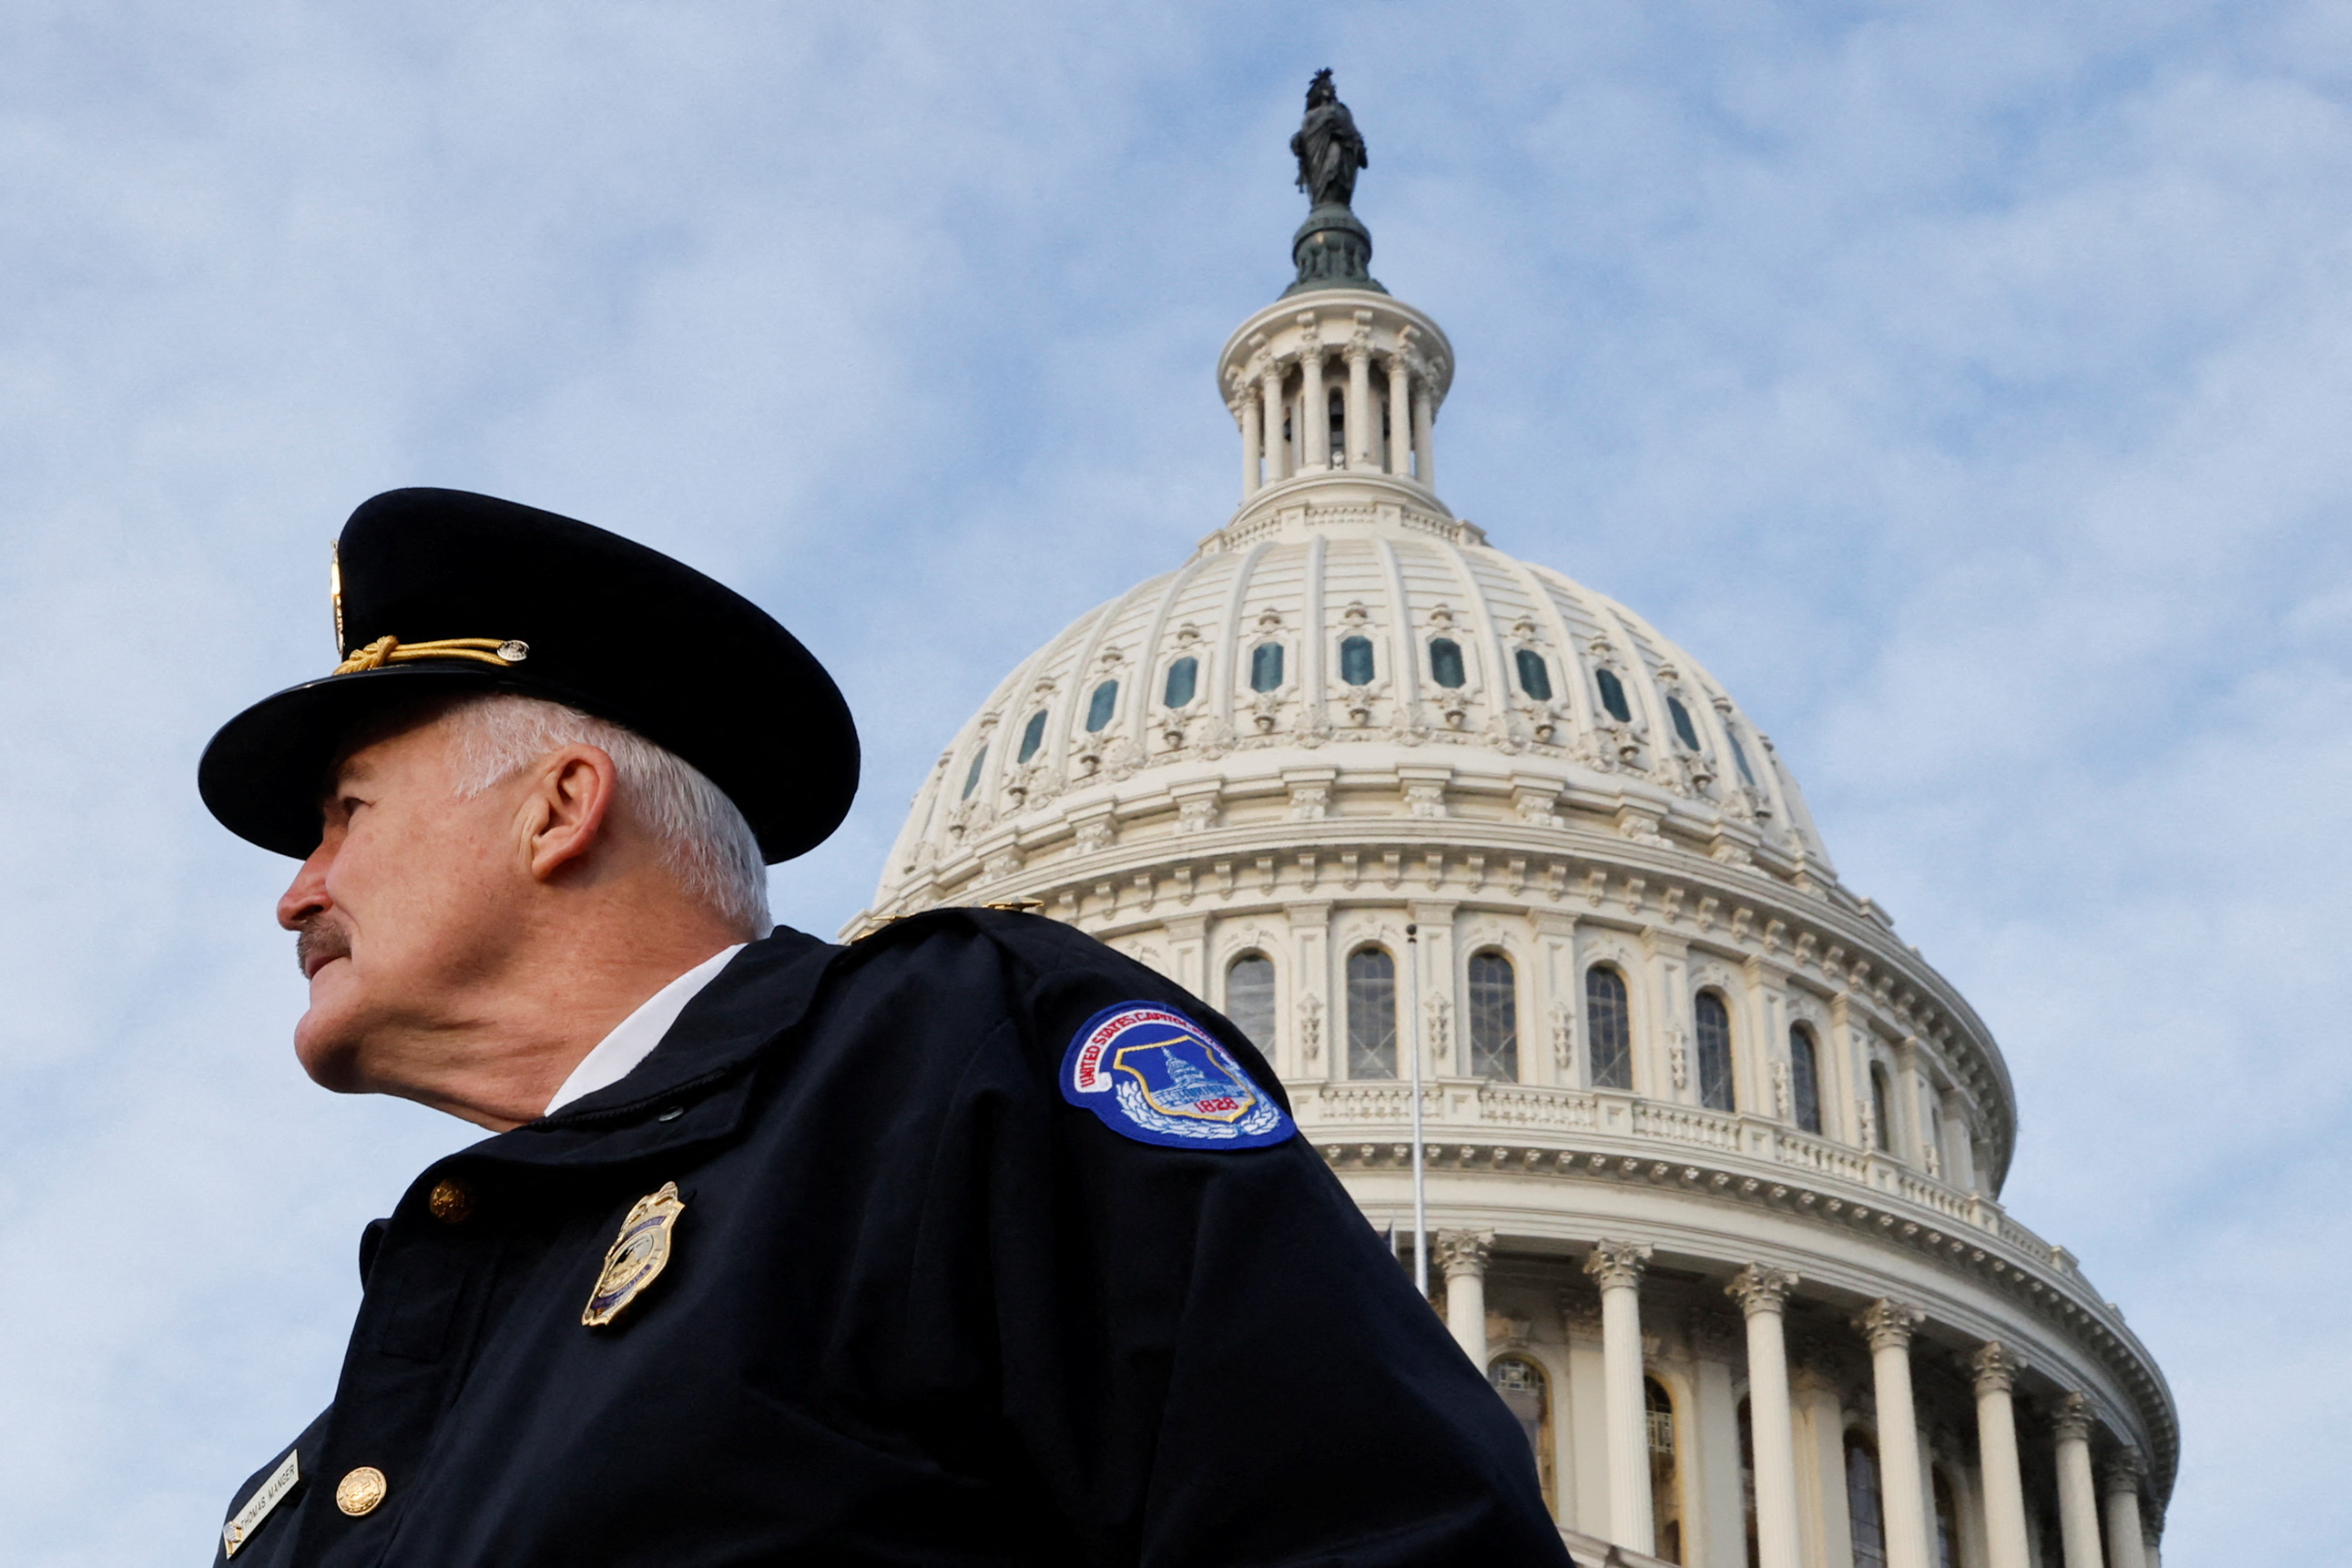 U.S. Capitol Police Chief J. Thomas Manger stands outside the U.S. Capitol on the first anniversary of the January 6, 2021 attack on the Capitol by supporters of former President Donald Trump, on Capitol Hill in Washington, U.S., January 6, 2022. REUTERS/Jonathan Ernst